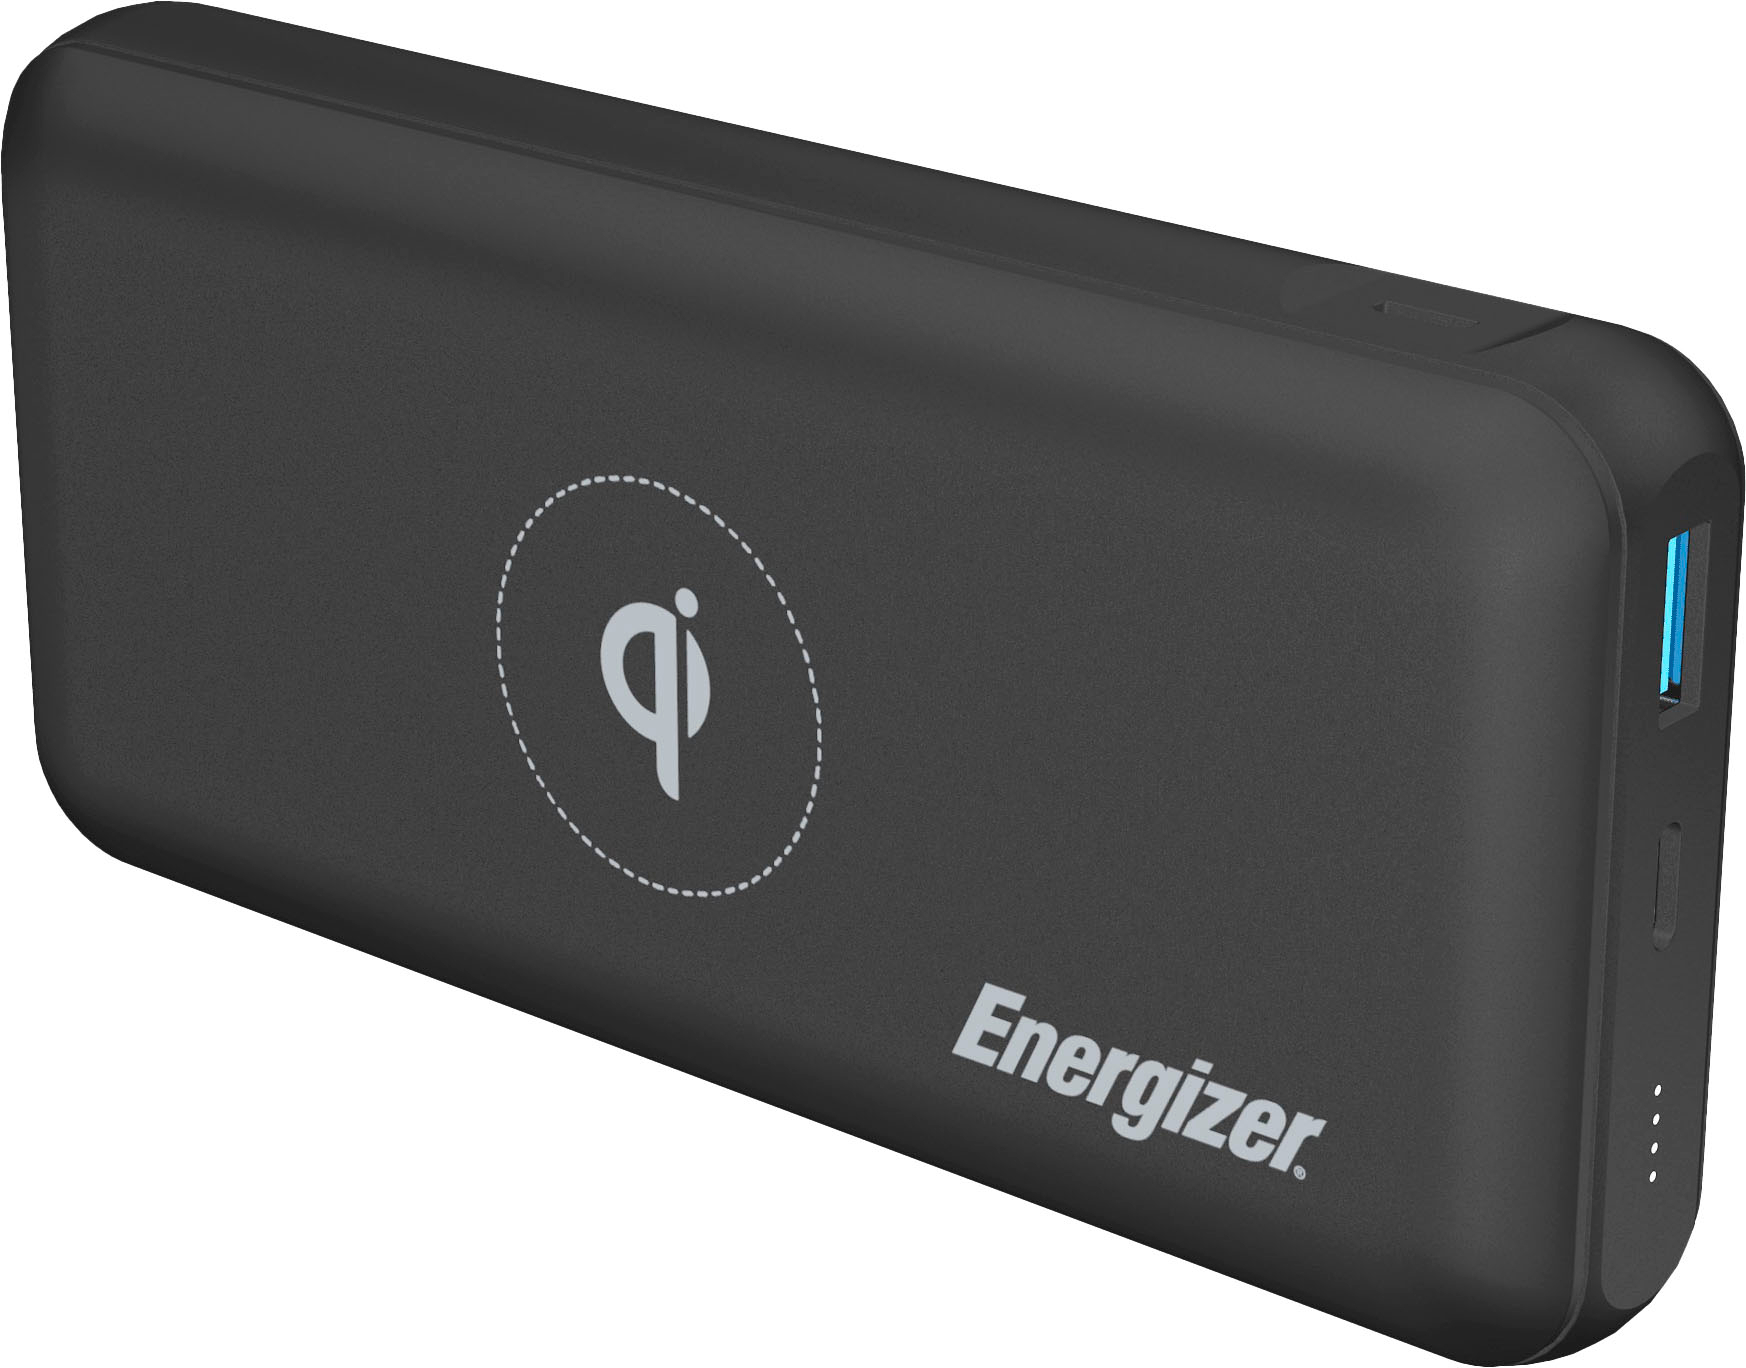 Angle View: myCharge - Adventure H2O Turbo 10,050 mAh Portable Charger for Most USB Enabled Devices - Gray